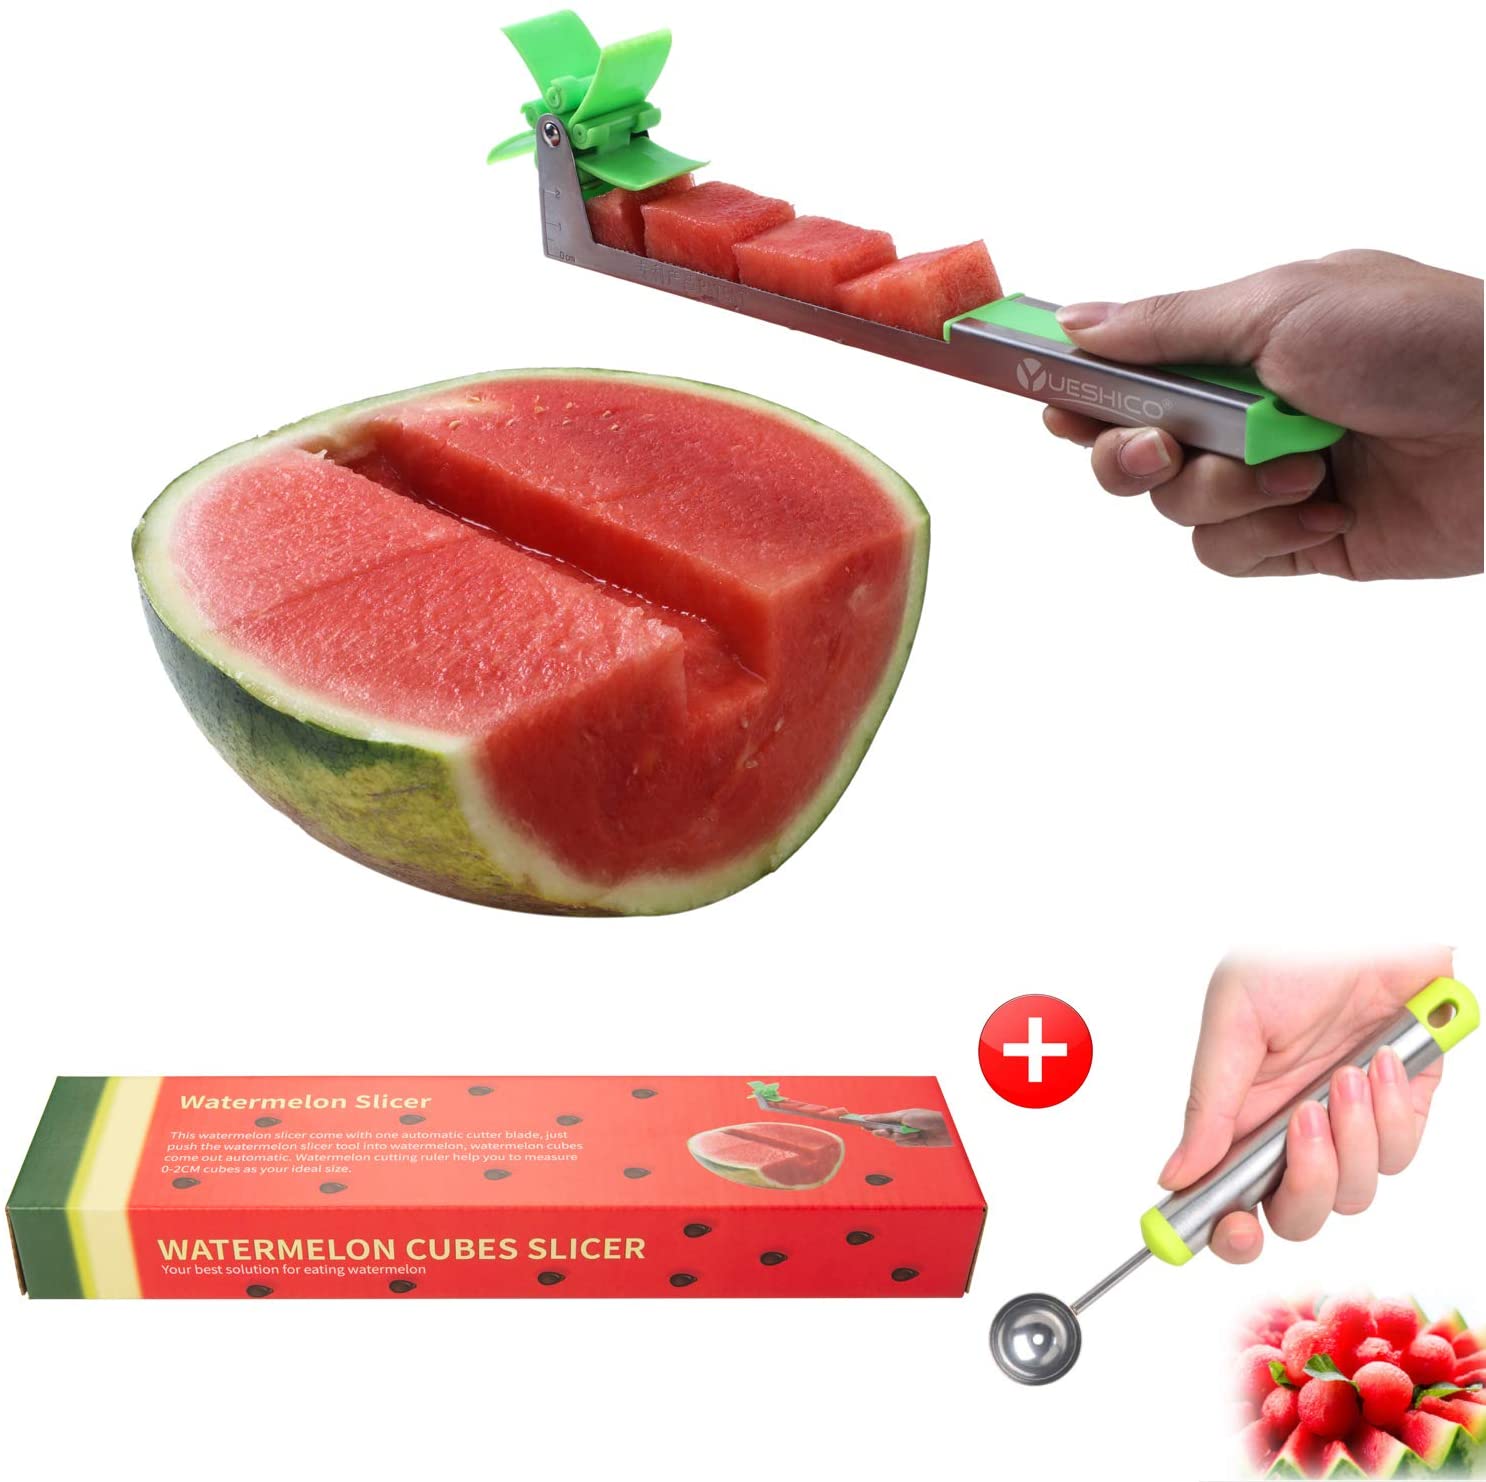 Yueshico Stainless Steel Watermelon Slicer Cutter Knife Corer